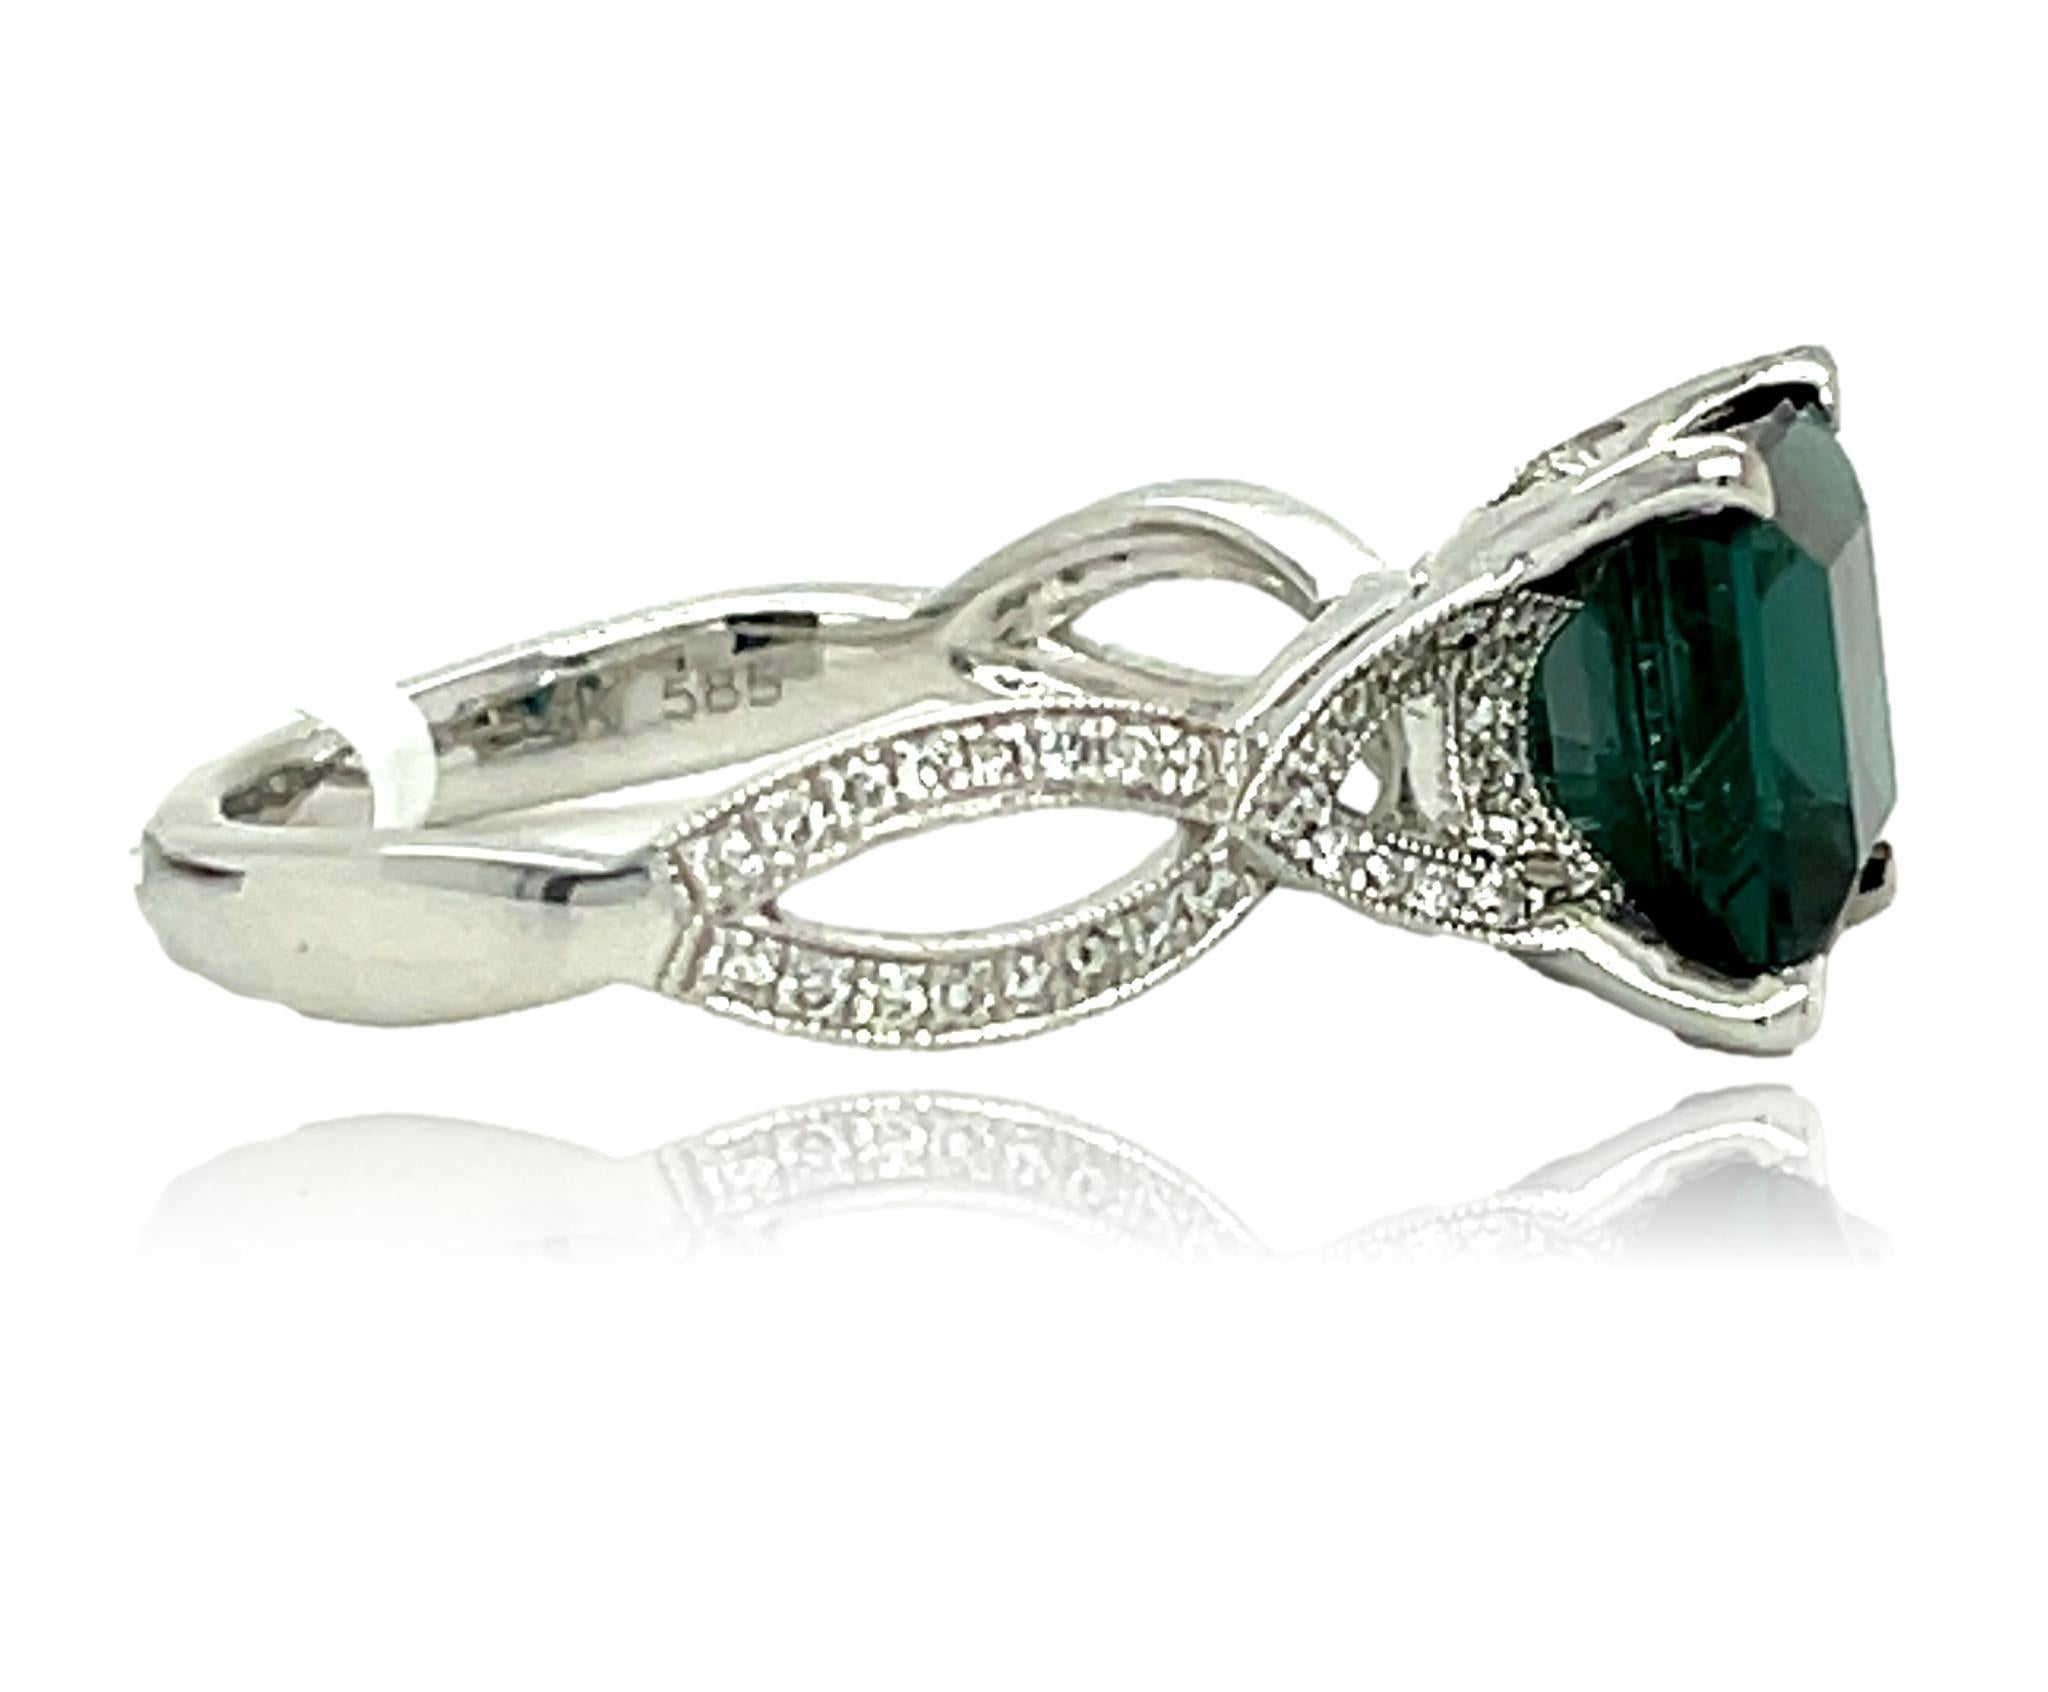 This stunning ring has a deep green Princess cut Green Tourmaline center with top quality diamonds on the shank and is set in 14K white gold. It comes in a beautiful box ready for the perfect gift!

14KW:                          3.50 gms
Green